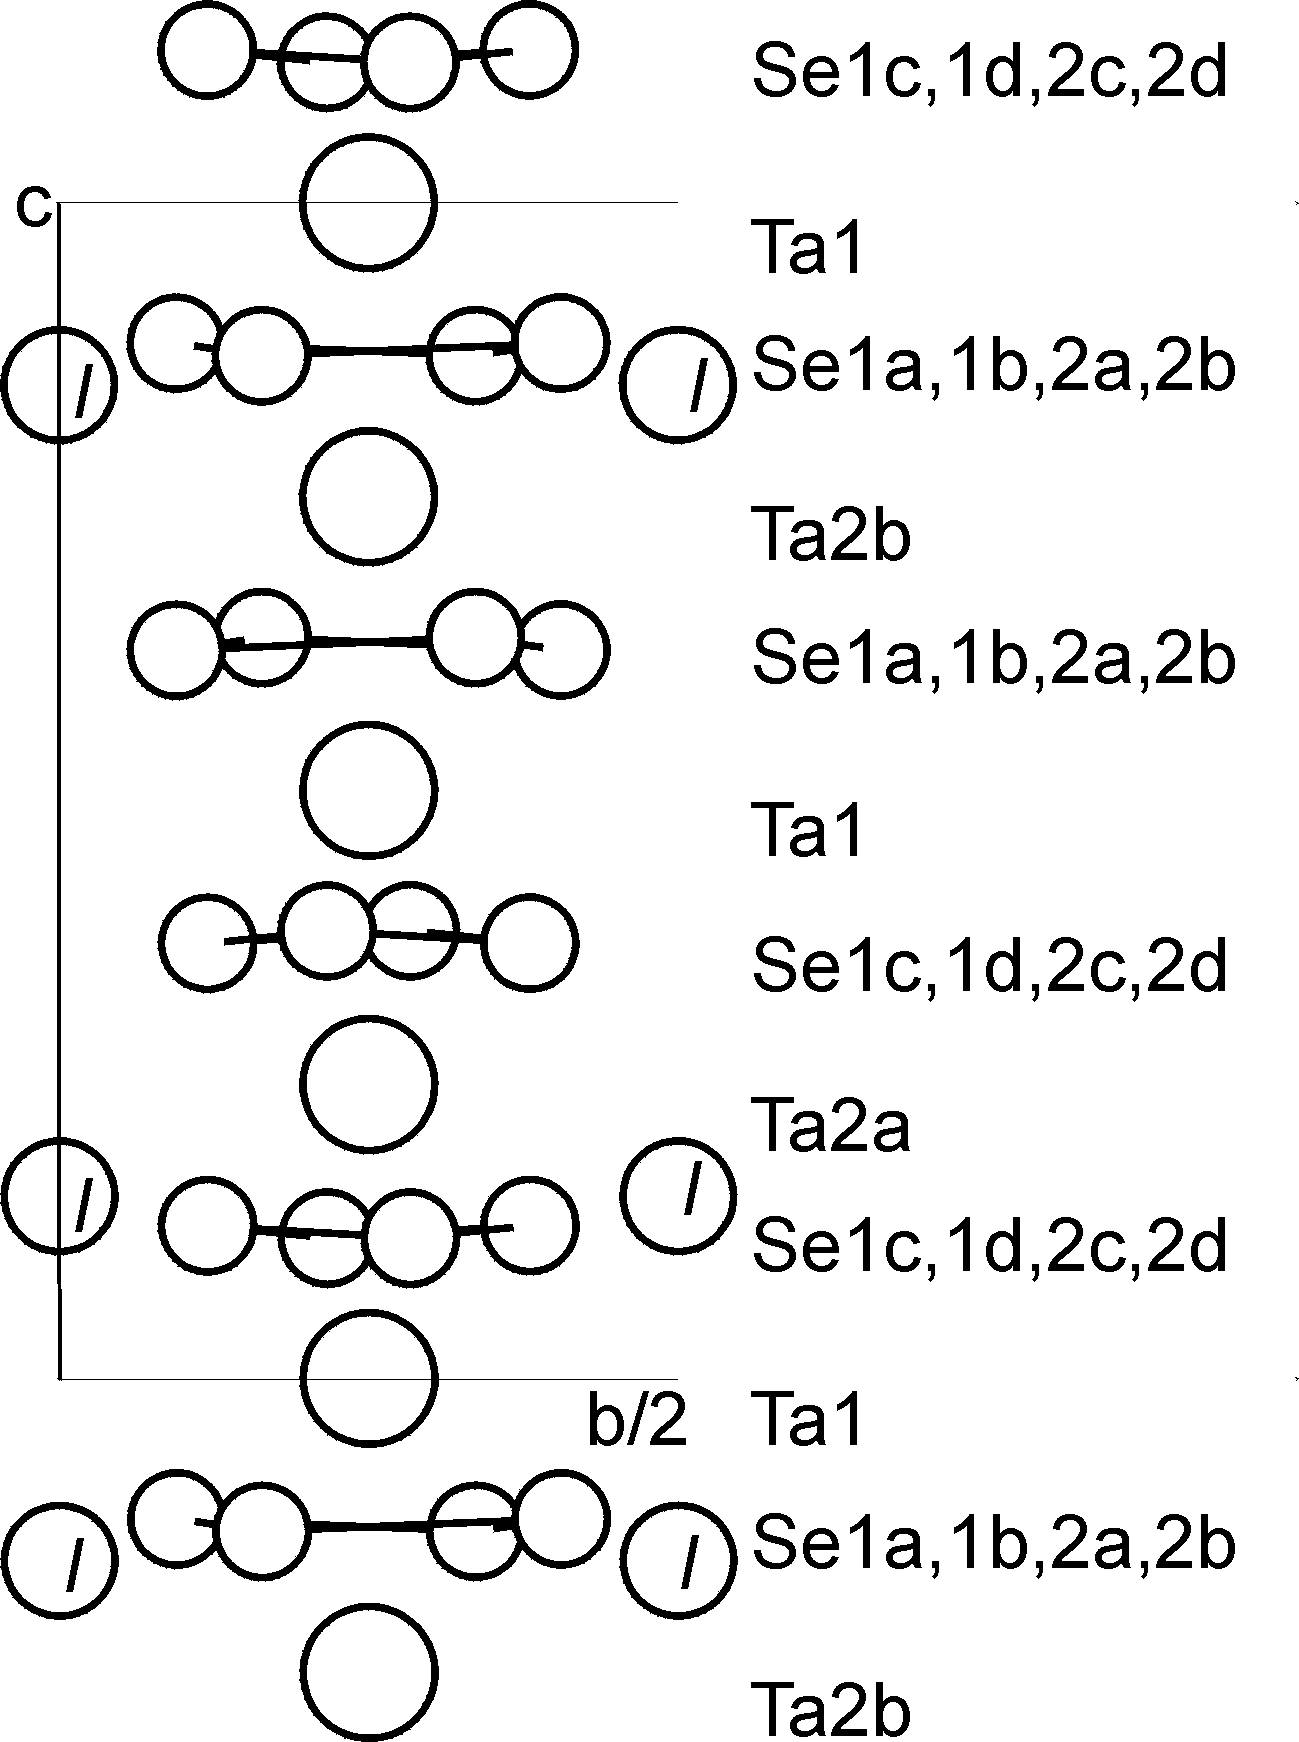 A figure of the structure of the TaSe4 chain centered on x=y=0.25